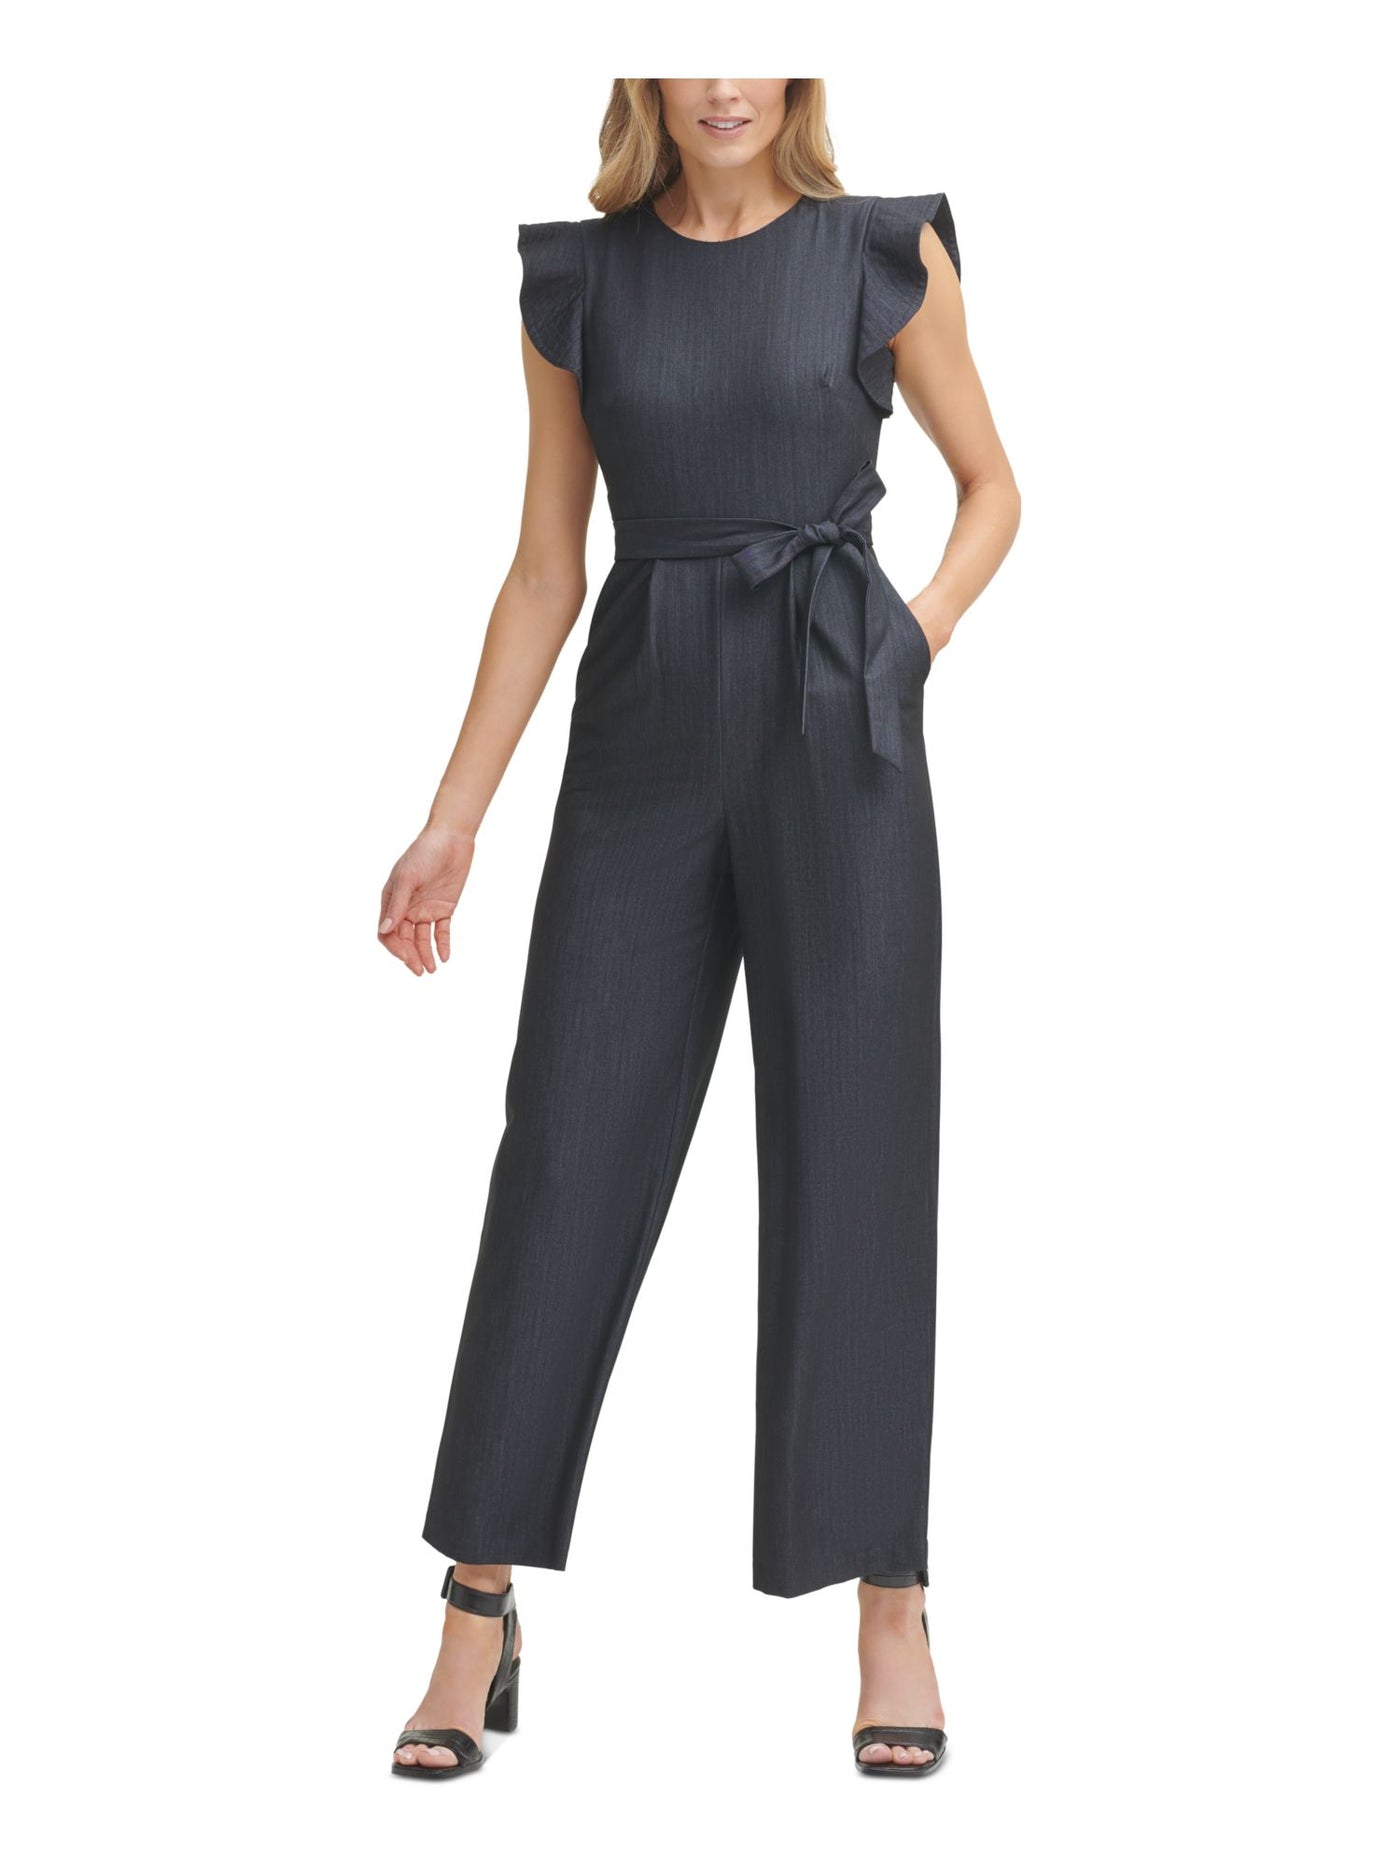 CALVIN KLEIN Womens Navy Chambray Pocketed Zippered Tie Belt Pleated Ruffled Cap Sleeve Round Neck Straight leg Jumpsuit 4